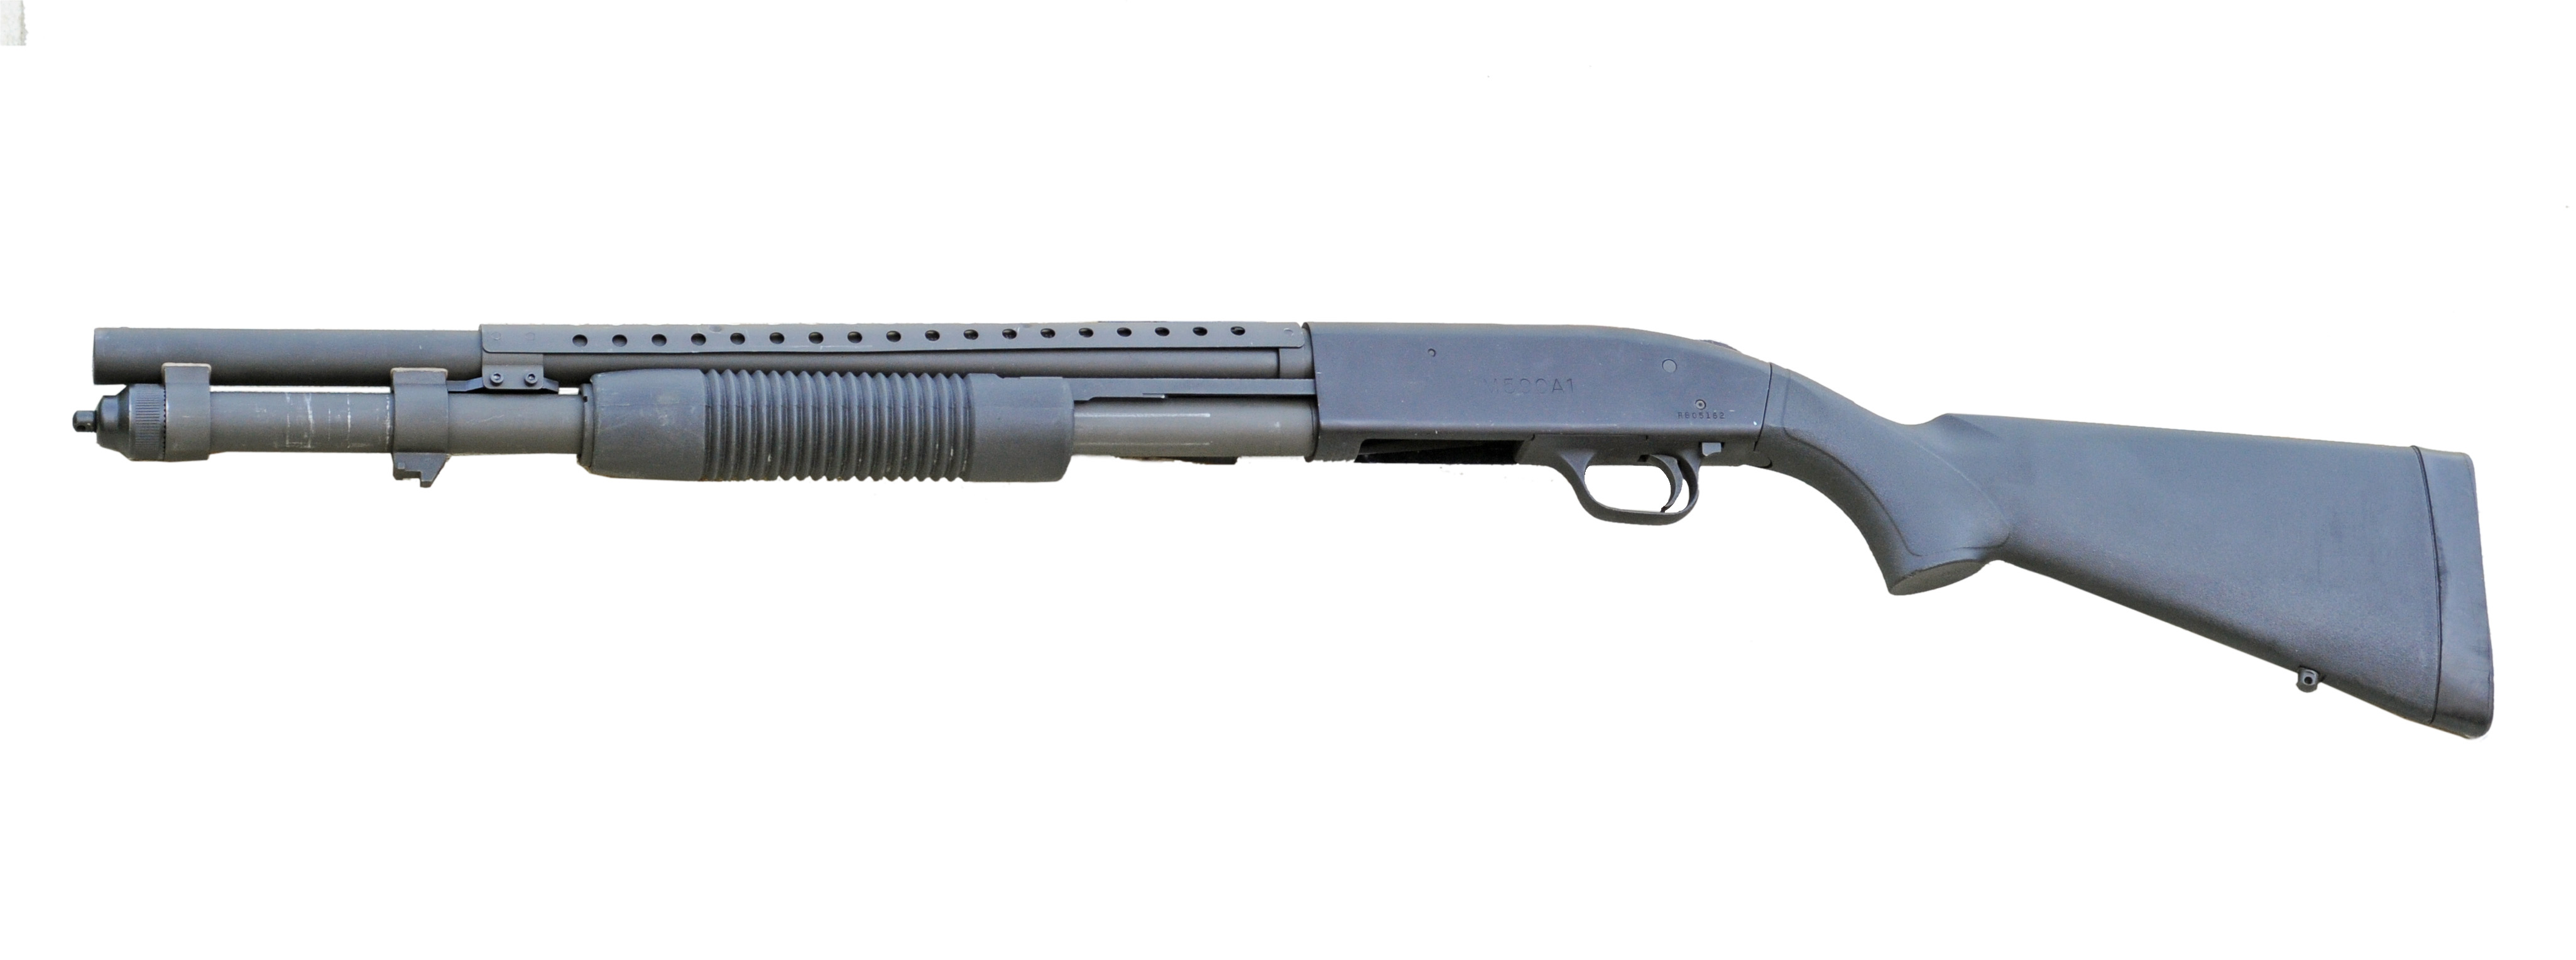 5. Mossberg have enjoyed great success with their model 500 series of pump action shotguns with its only real competitor being the Remington 870. 